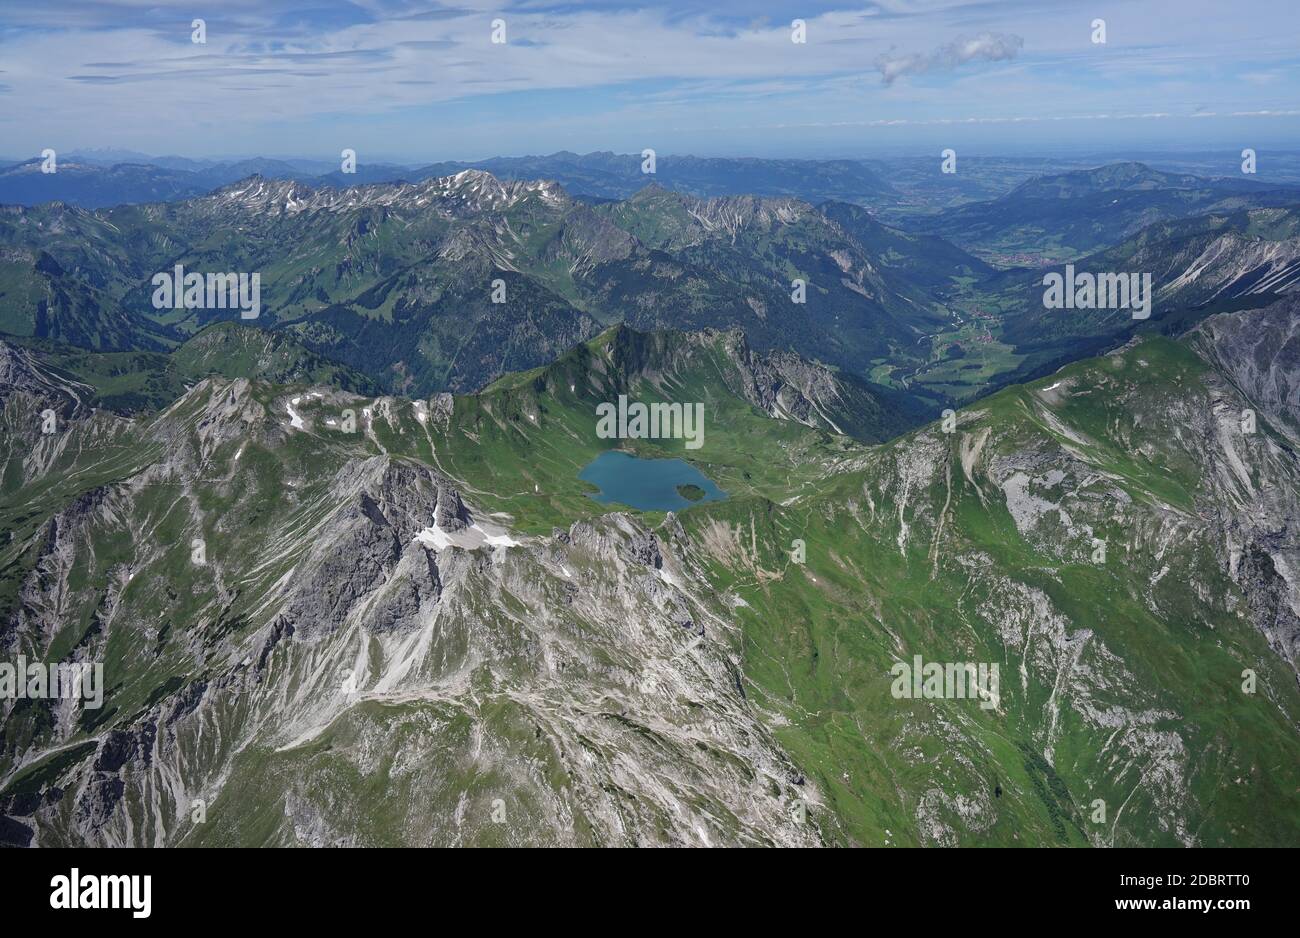 Aerial view of German mountain lake with the adjacent mountains from Austria Stock Photo